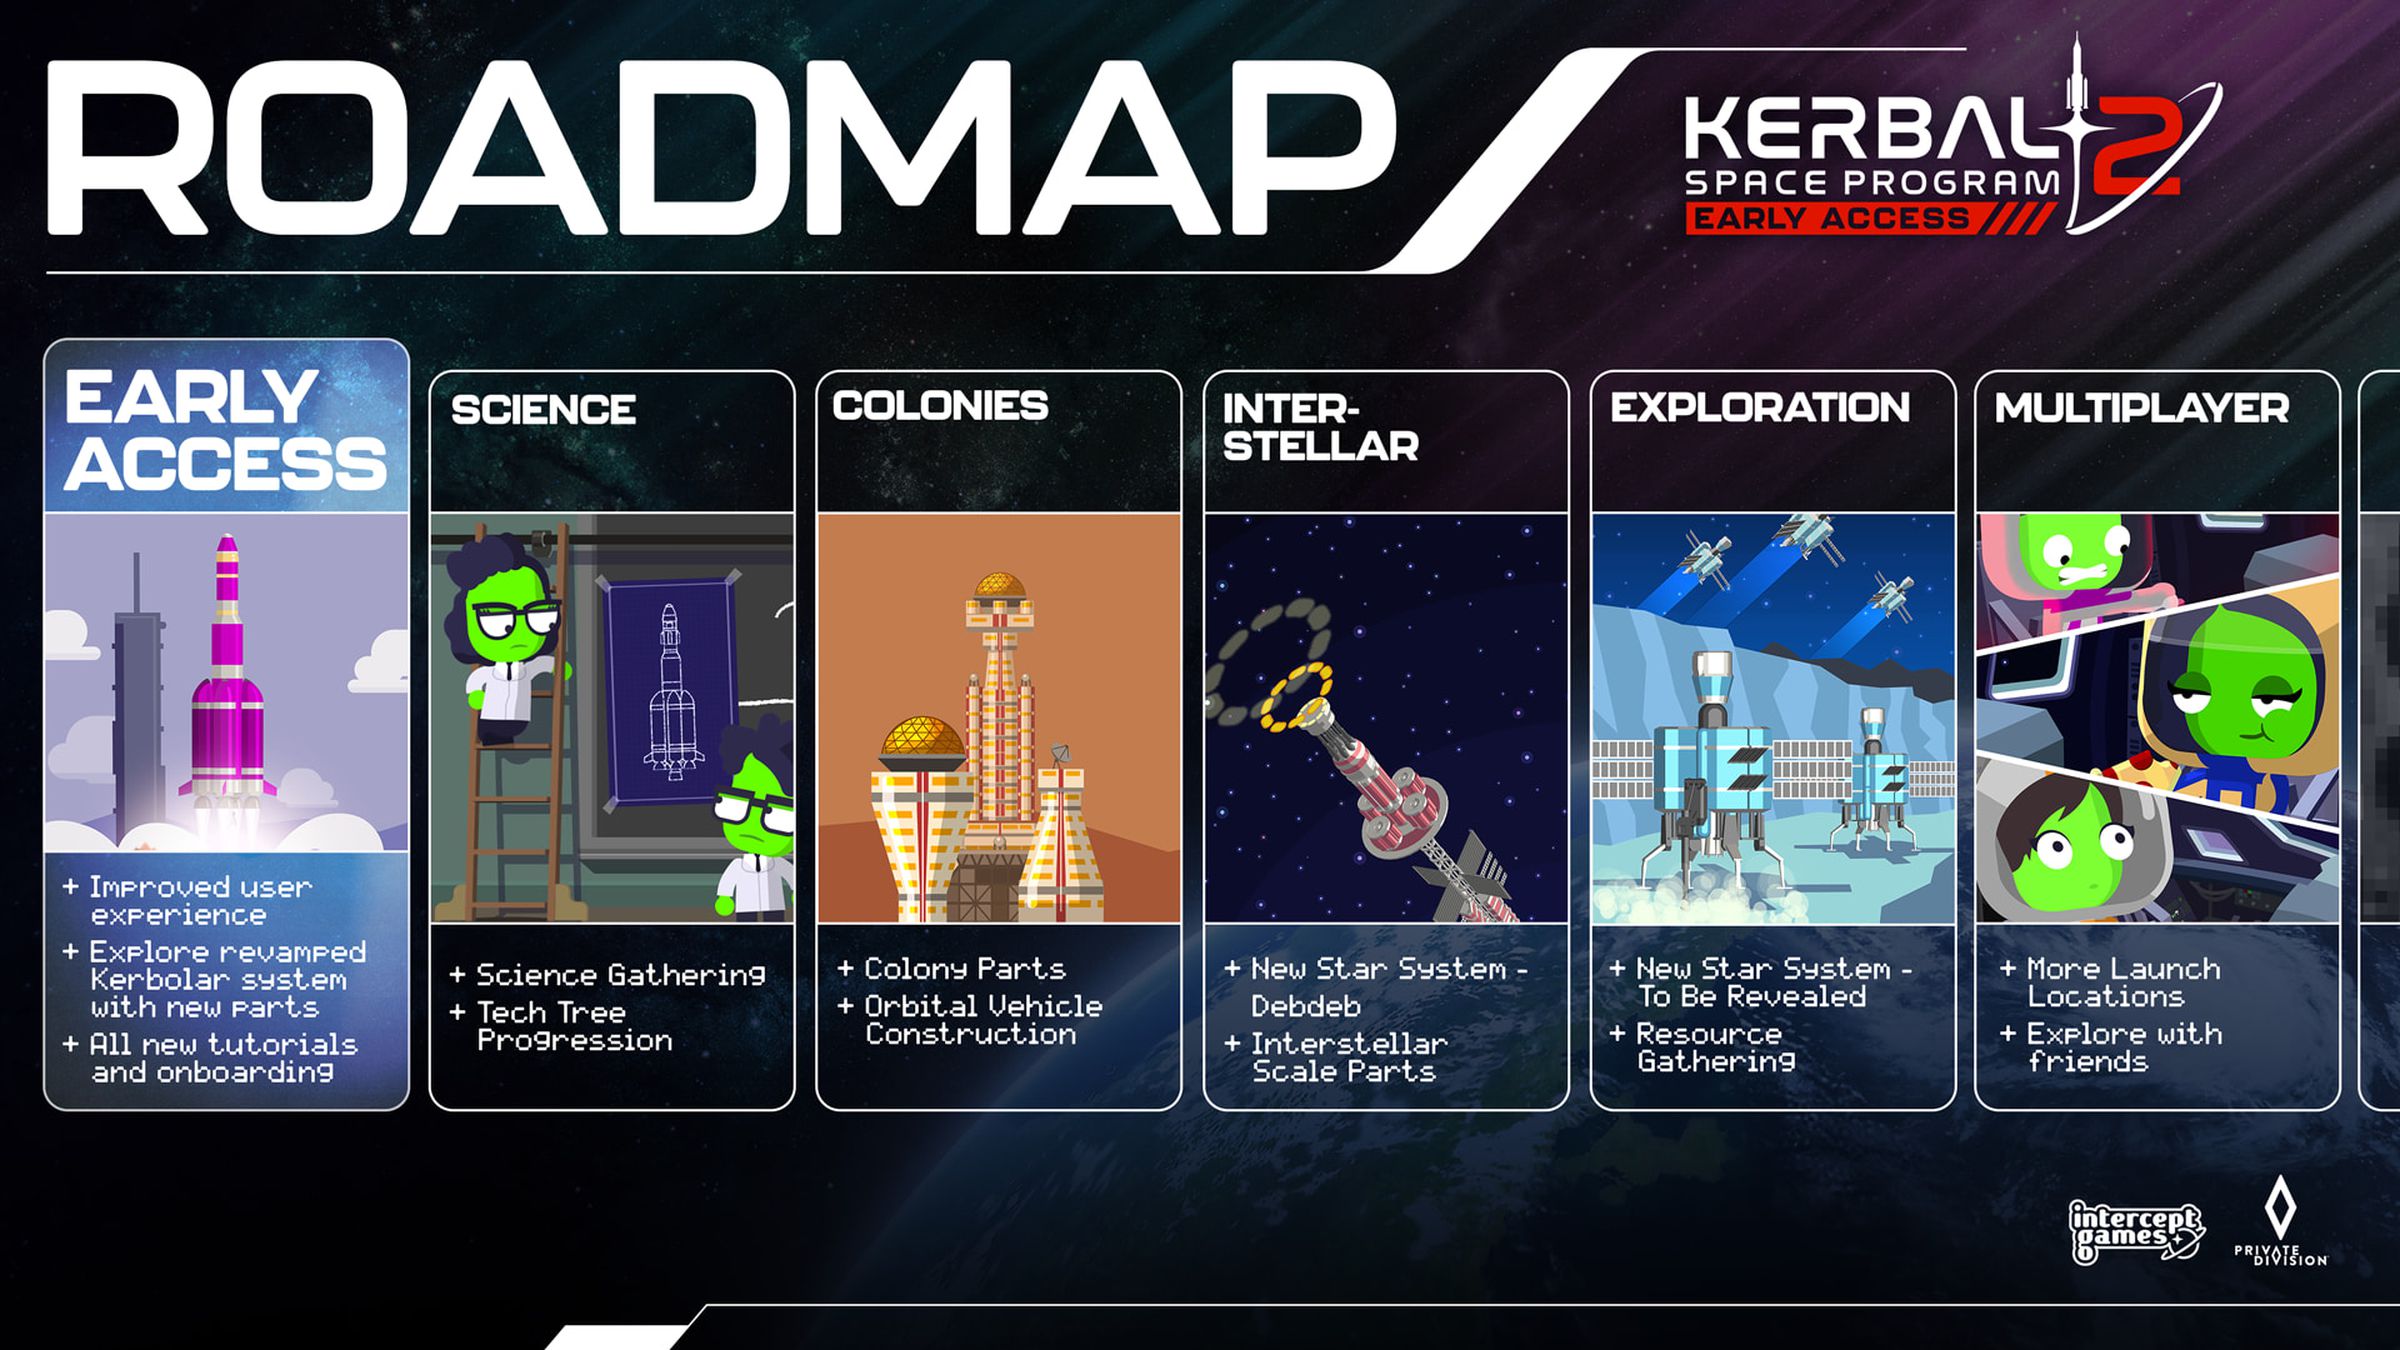 A timeline of the Early Access roadmap for Kerbal Space Program 2, detailing features like interstellar travel and multiplayer options